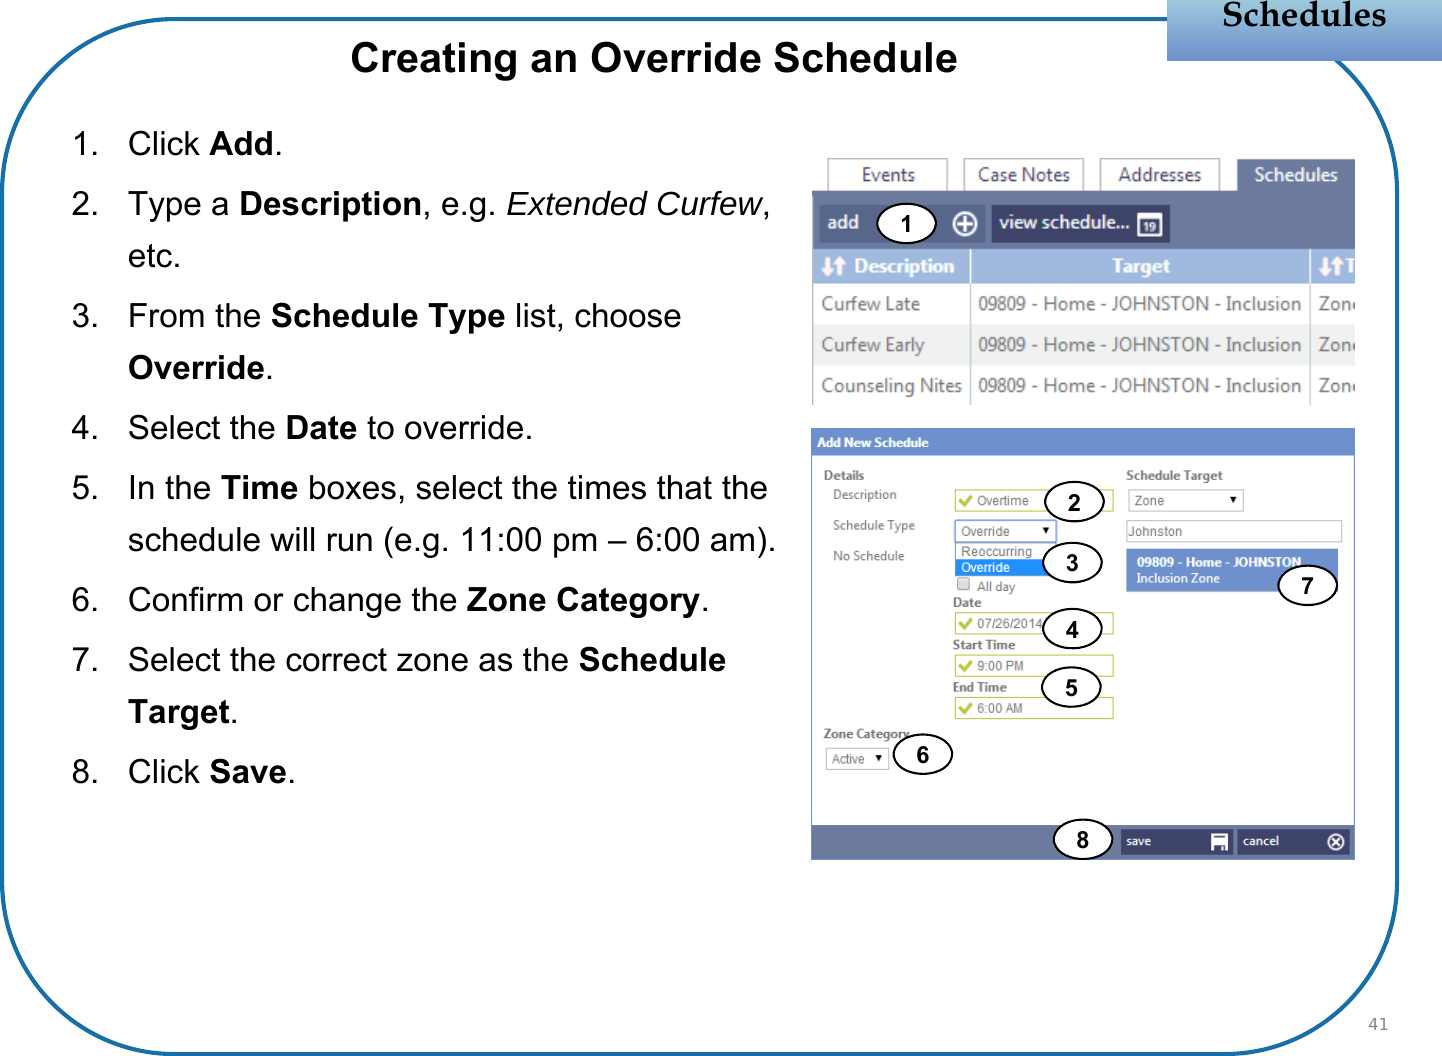 1. Click Add.2. Type a Description, e.g. Extended Curfew, etc.3. From the Schedule Type list, choose Override.4. Select the Date to override.5. In the Time boxes, select the times that the schedule will run (e.g. 11:00 pm – 6:00 am).6. Confirm or change the Zone Category.7. Select the correct zone as the Schedule Target.8. Click Save.SchedulesSchedulesCreating an Override Schedule4112345768